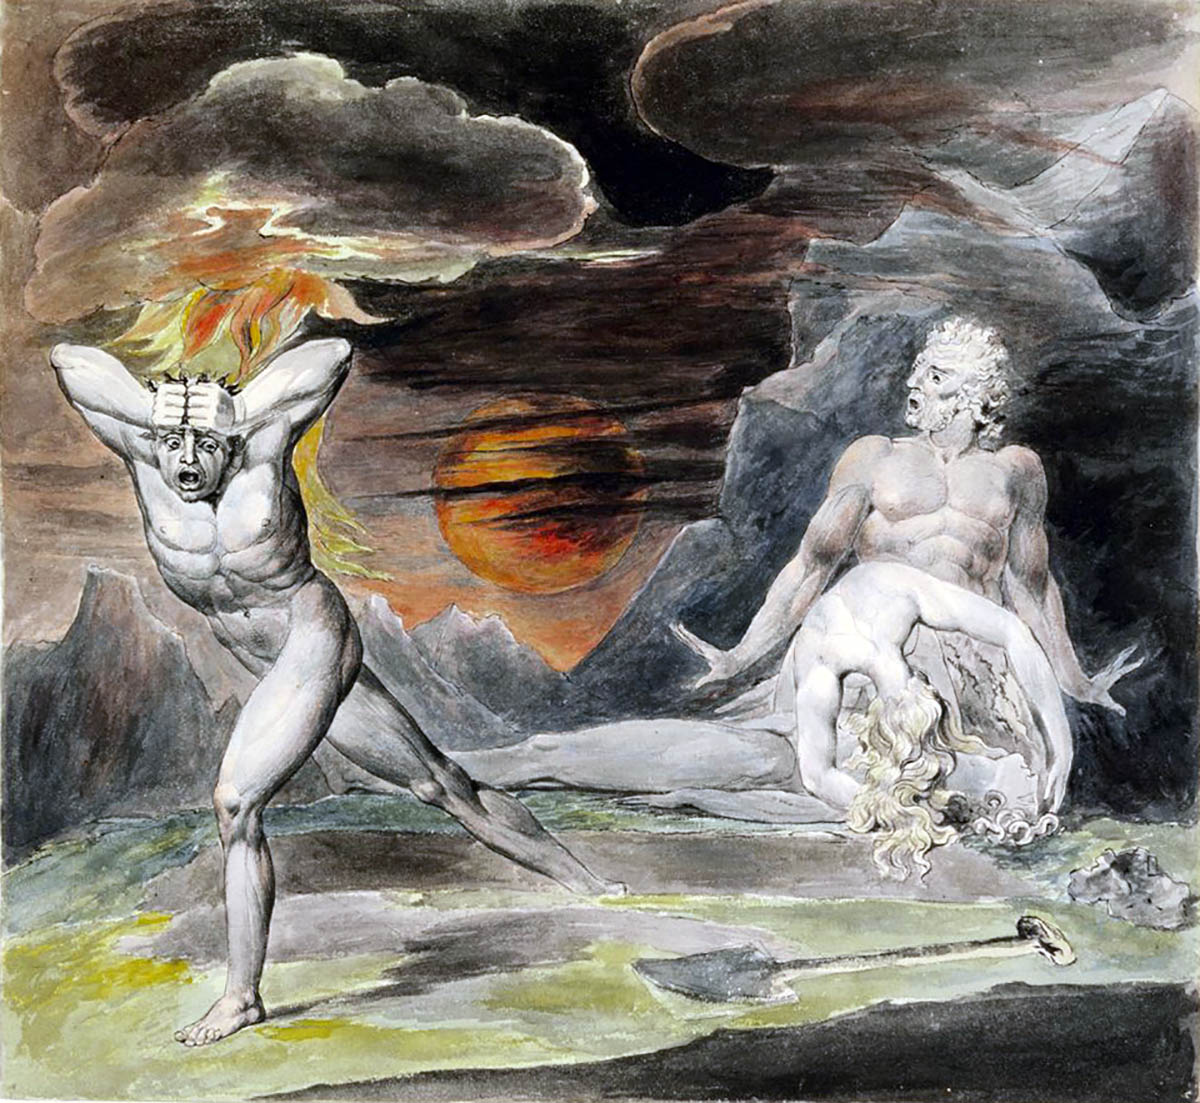 Cain Fleeing from the Wrath of God by William Blake